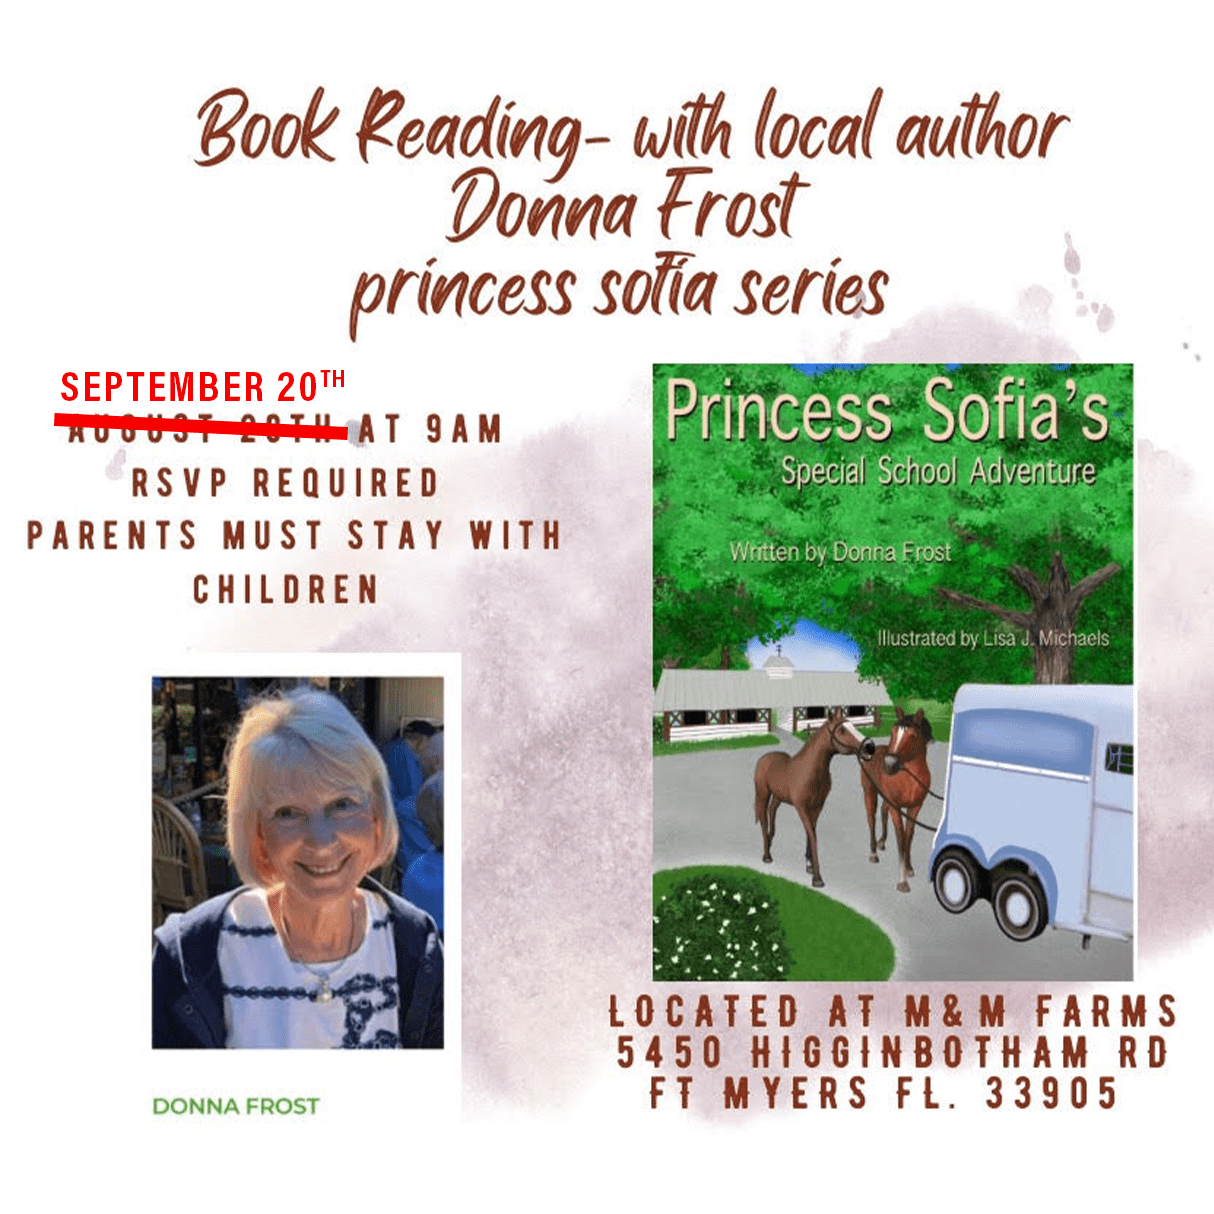 Children's Book Reading at M&M Farms Local Author Donna Frost